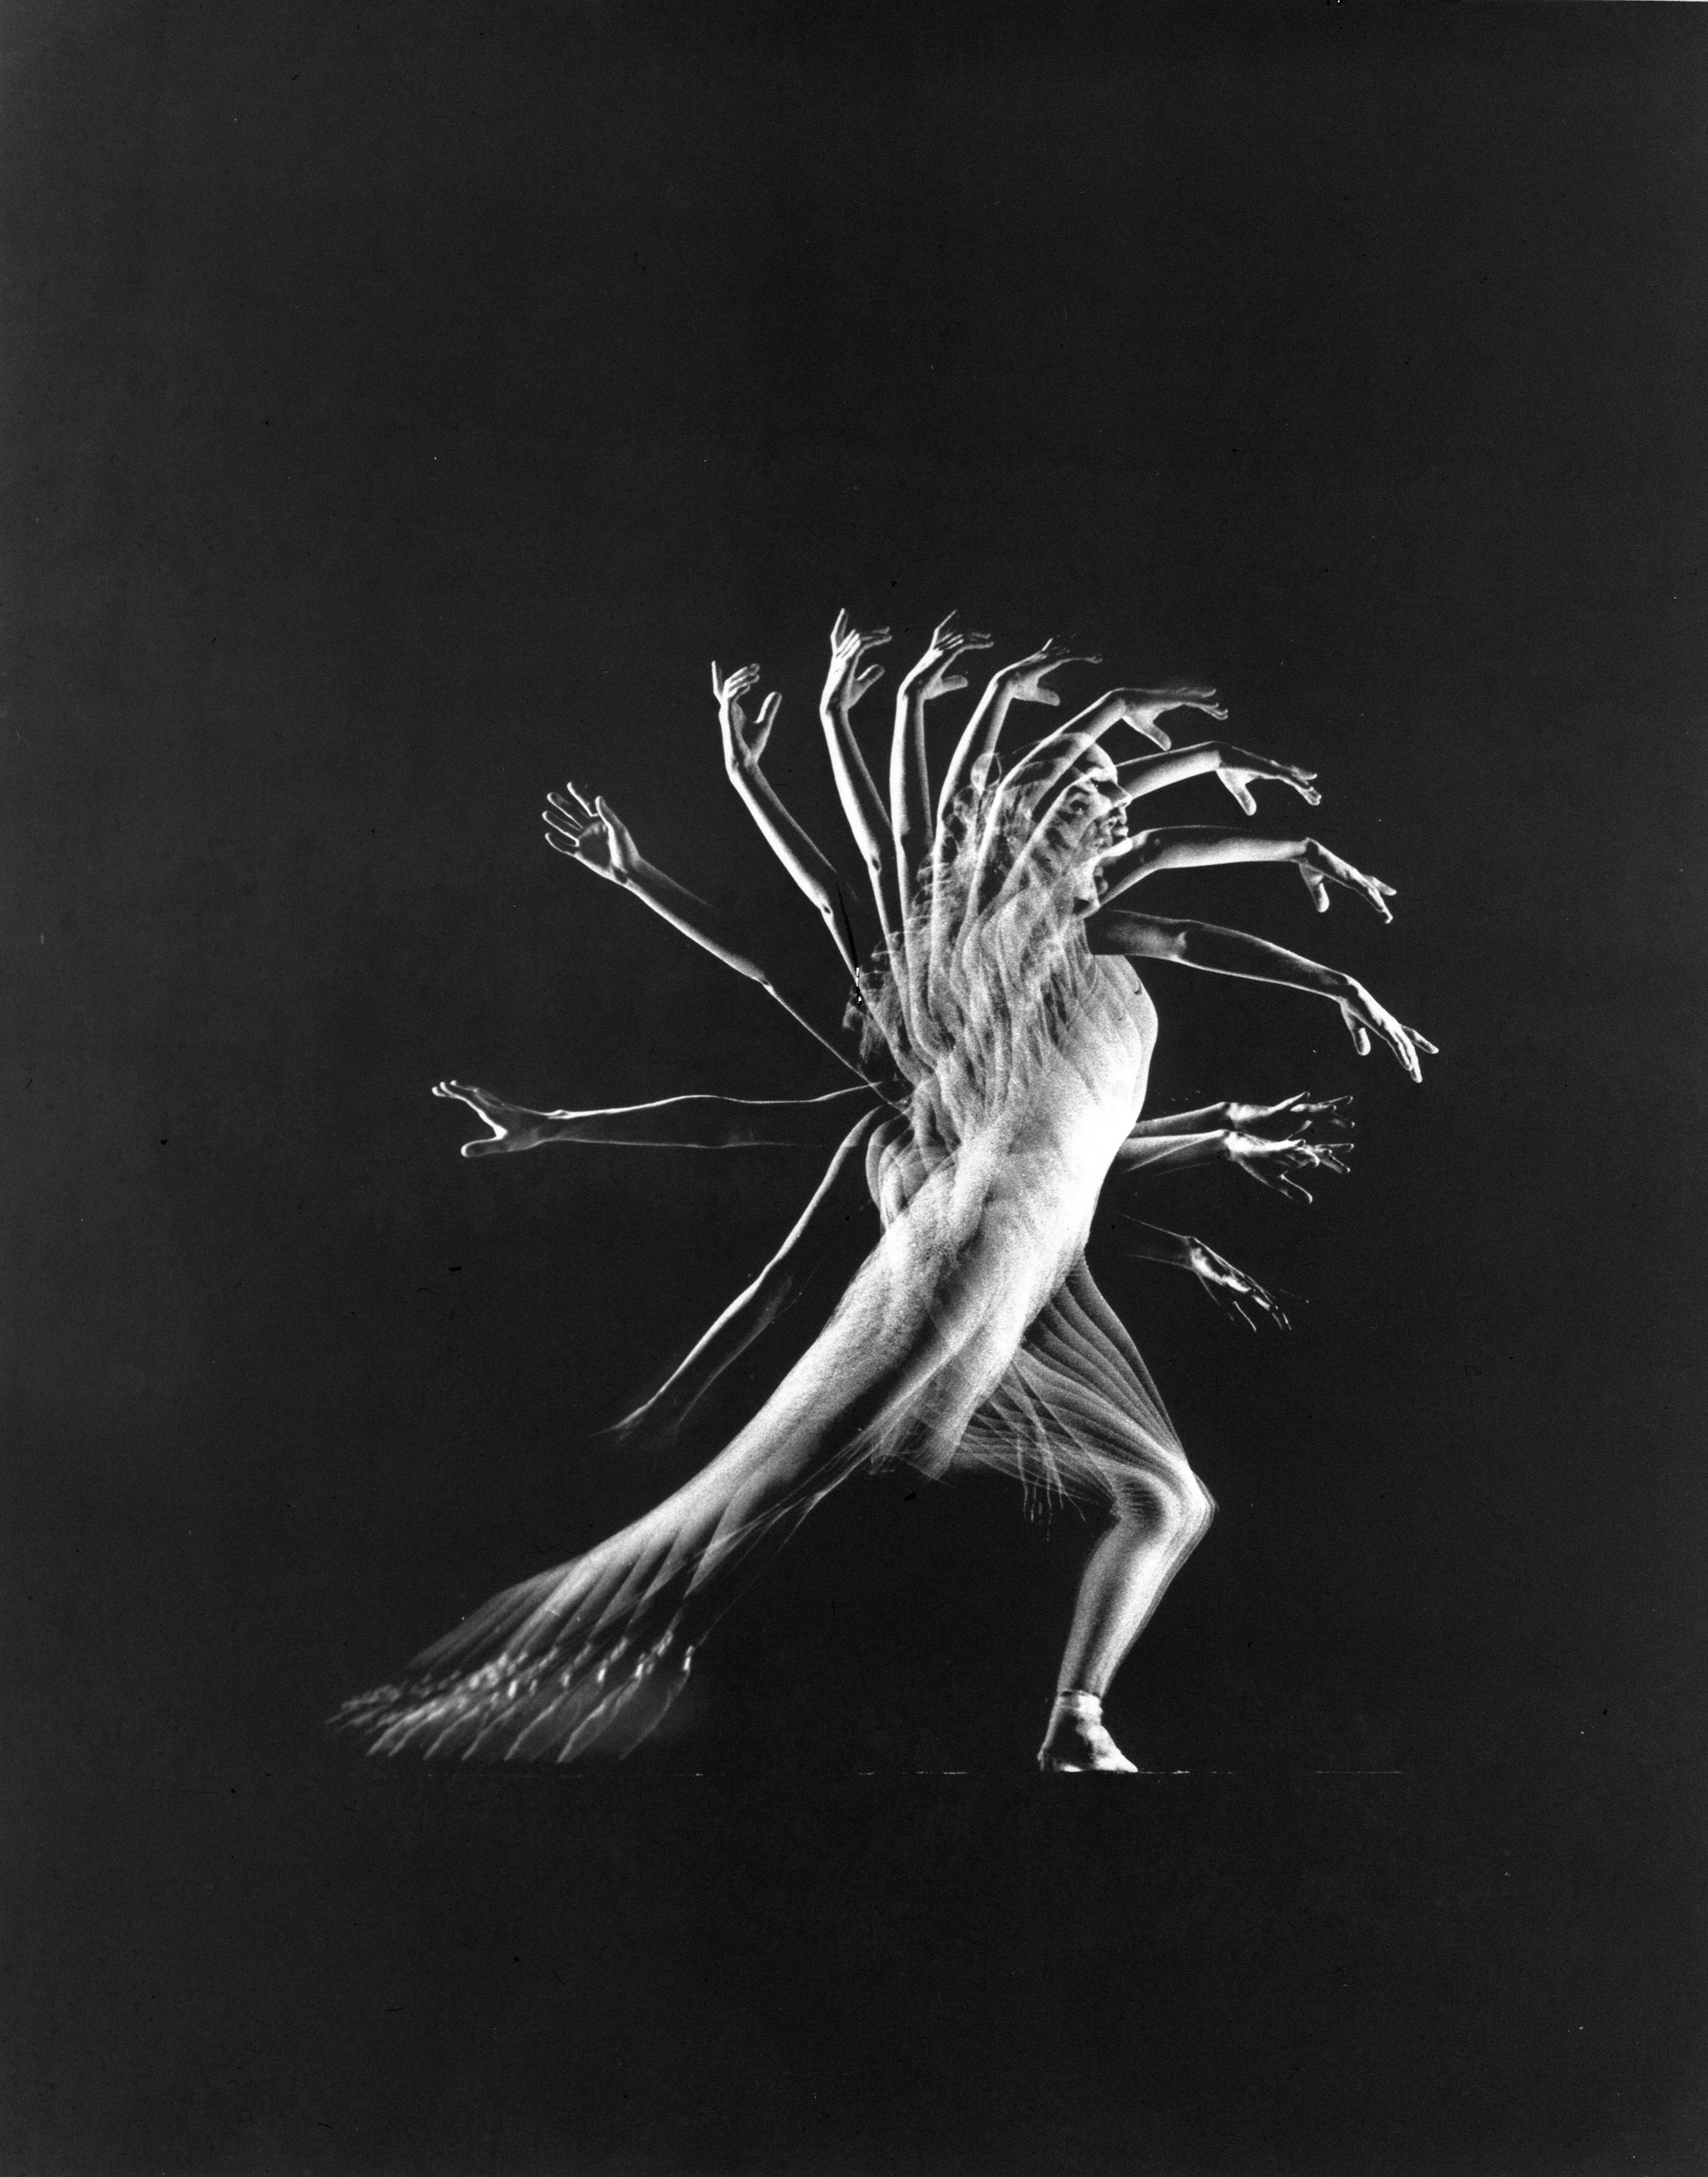 A stroboscopic multiple exposure image of an arm movement made by dancer Patricia McBride in New York in 1962.